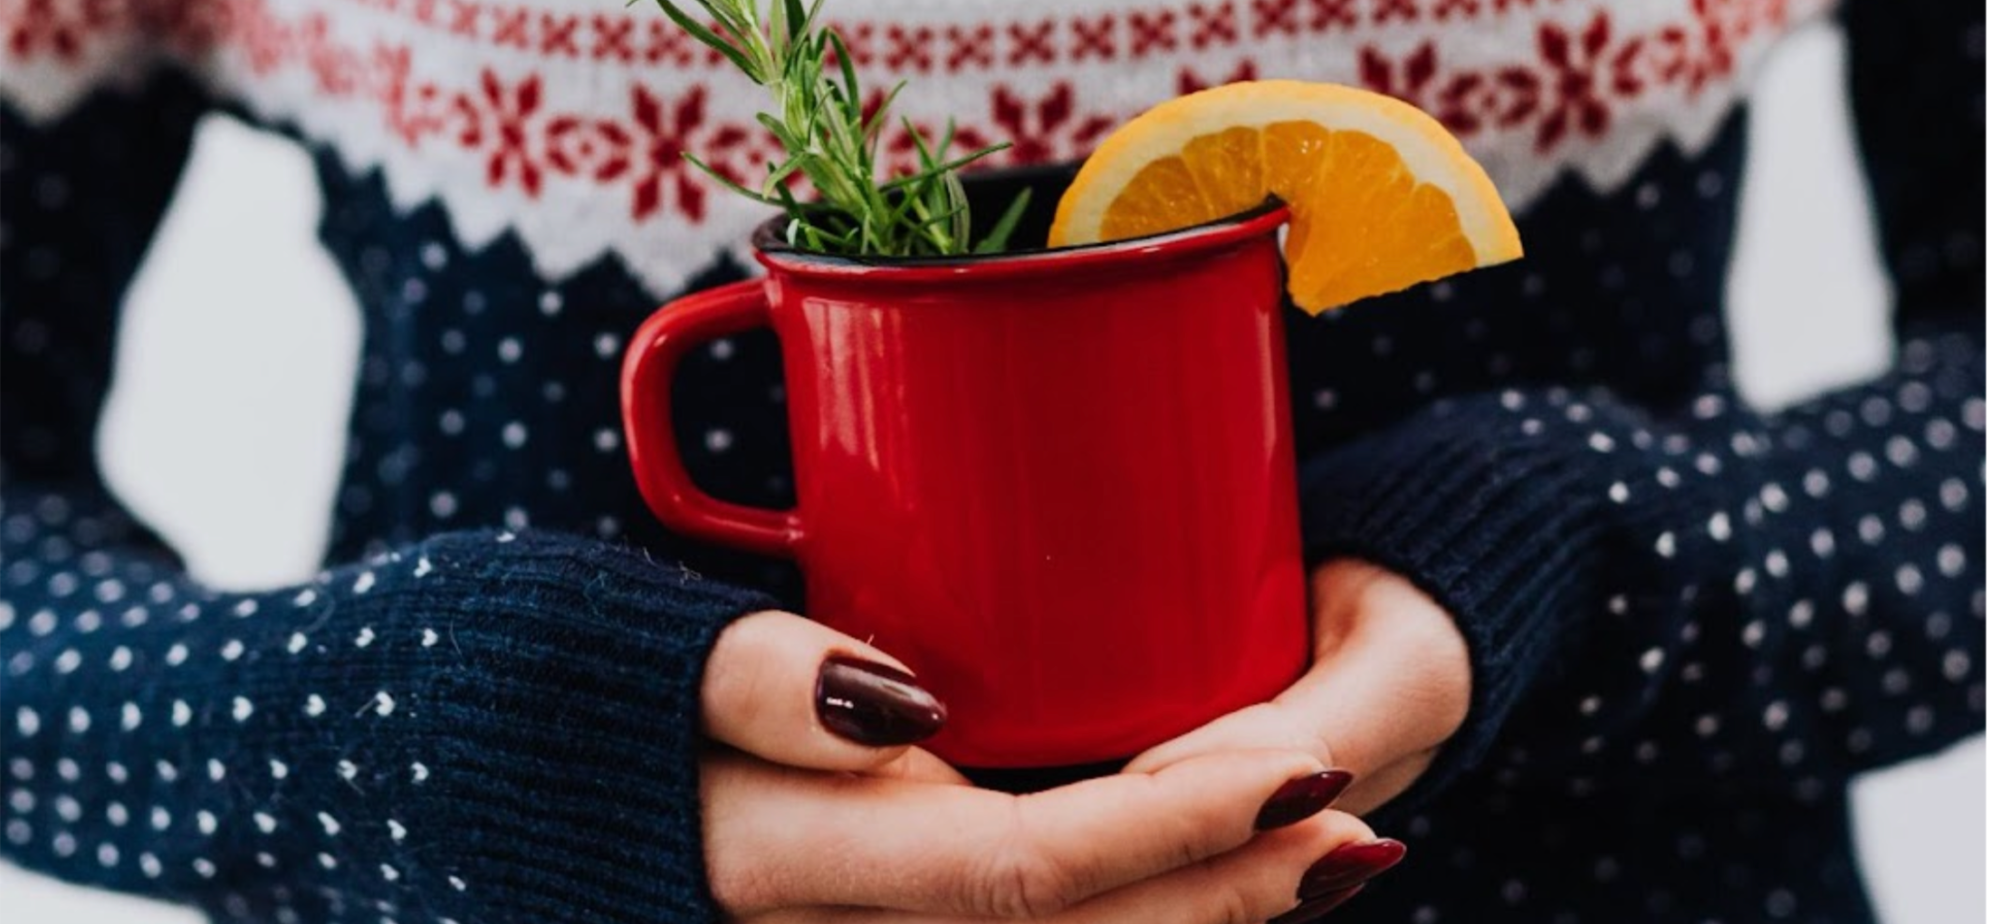 Woman in a Christmas jumper holding a red mug with thyme and an orange slice for a Christmas drink